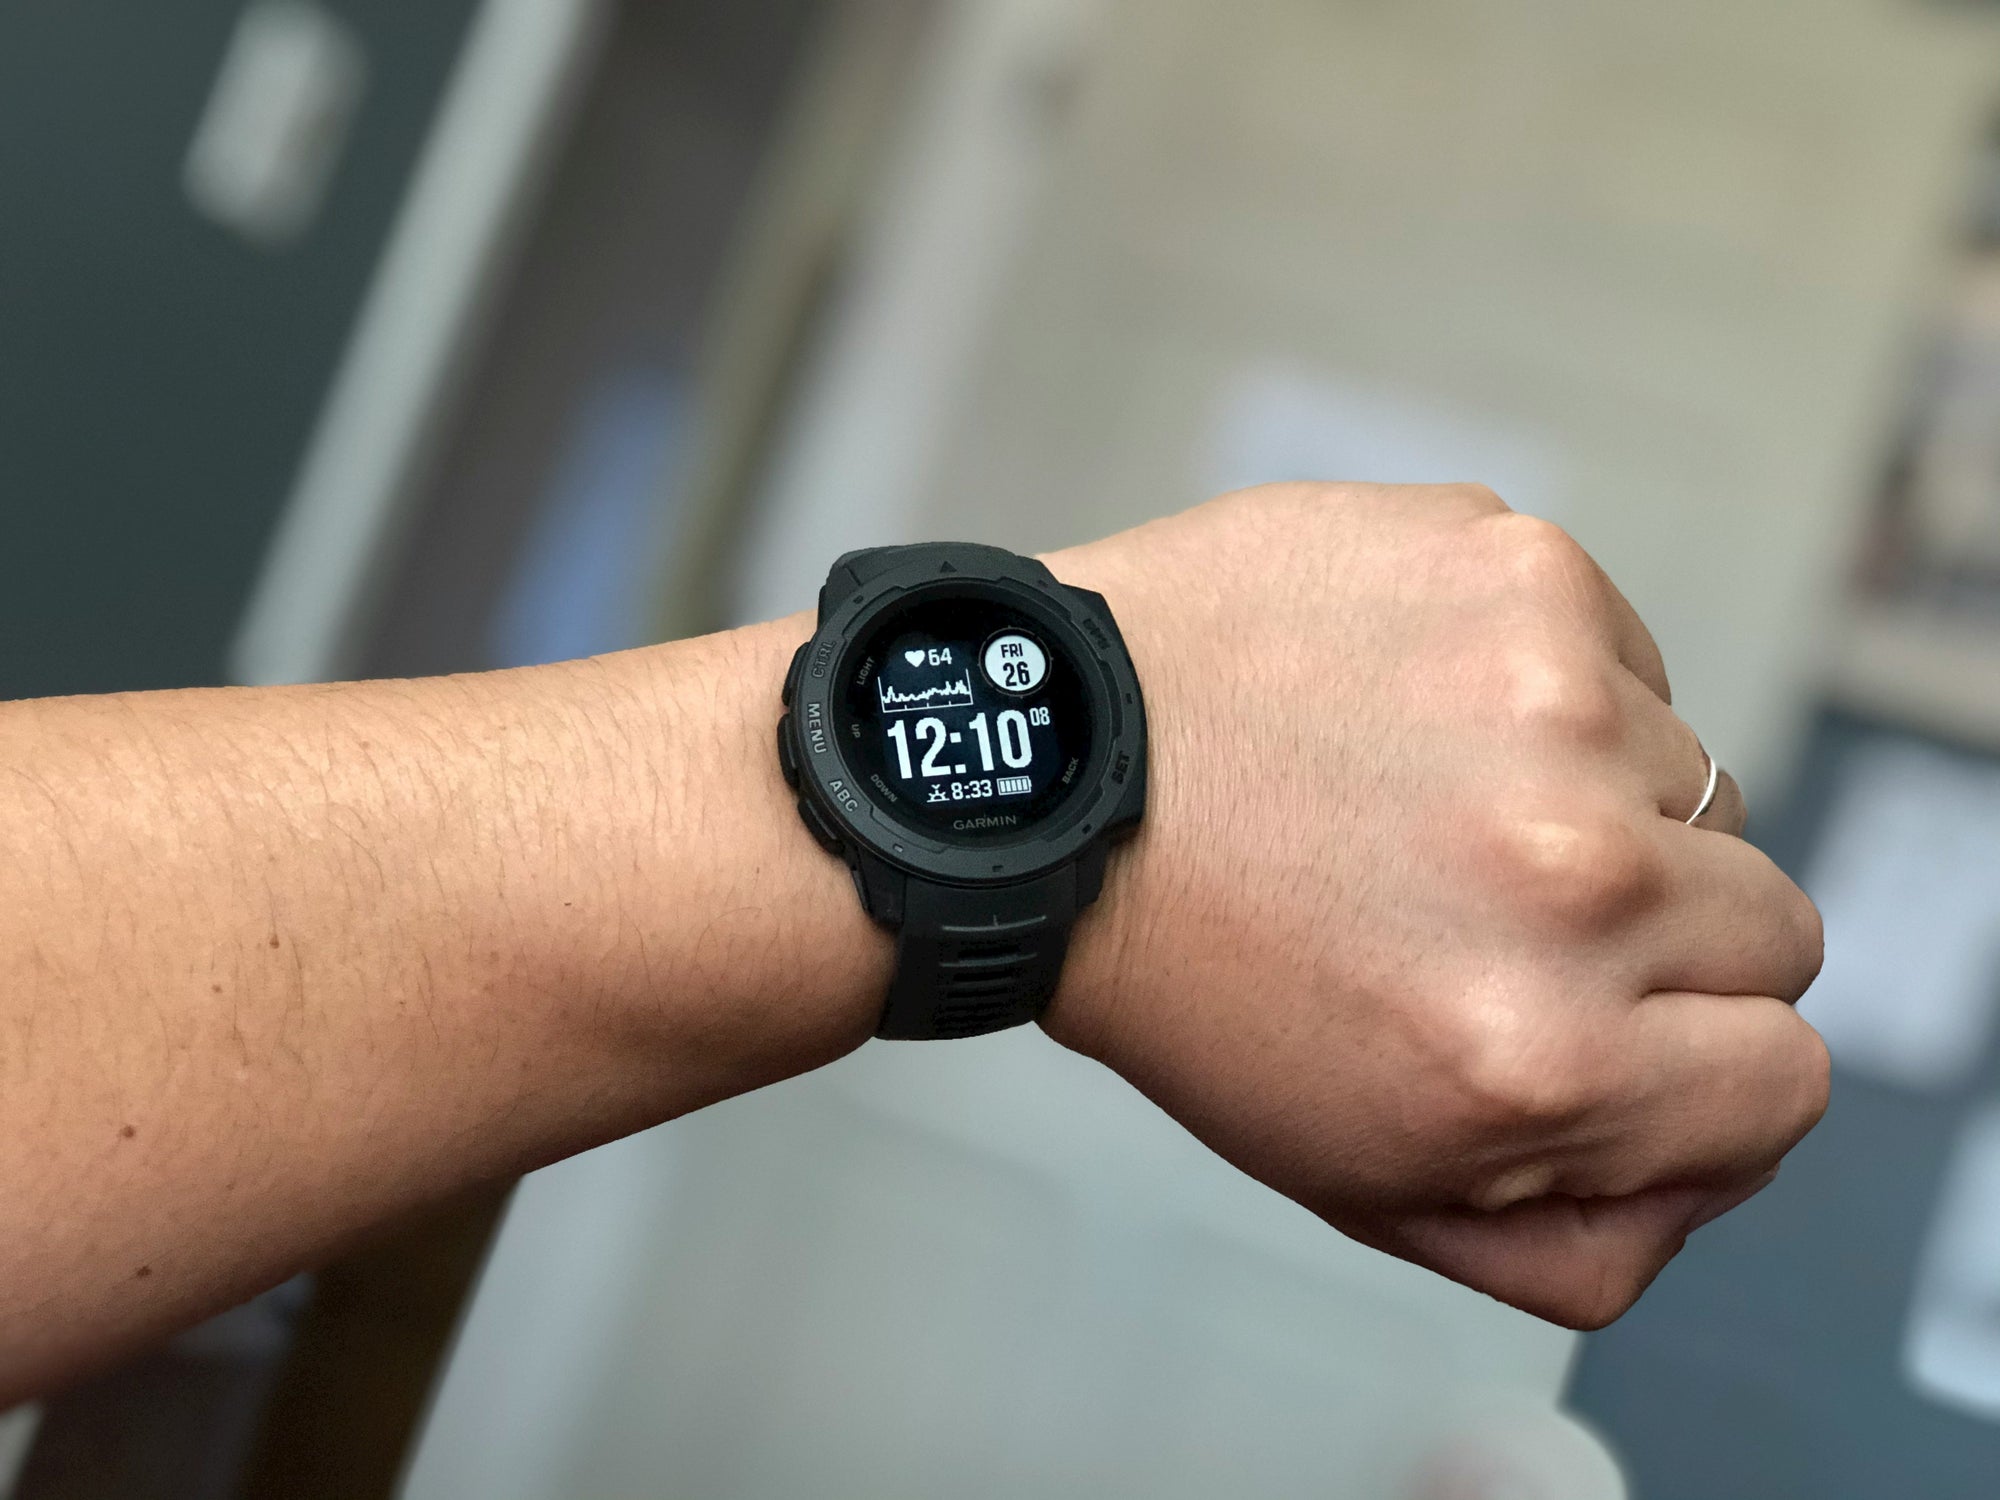 A males wrist wearing a black Garmin GPS running and hiking watch displaying the time, date, and other fitness tracking information on the screen.